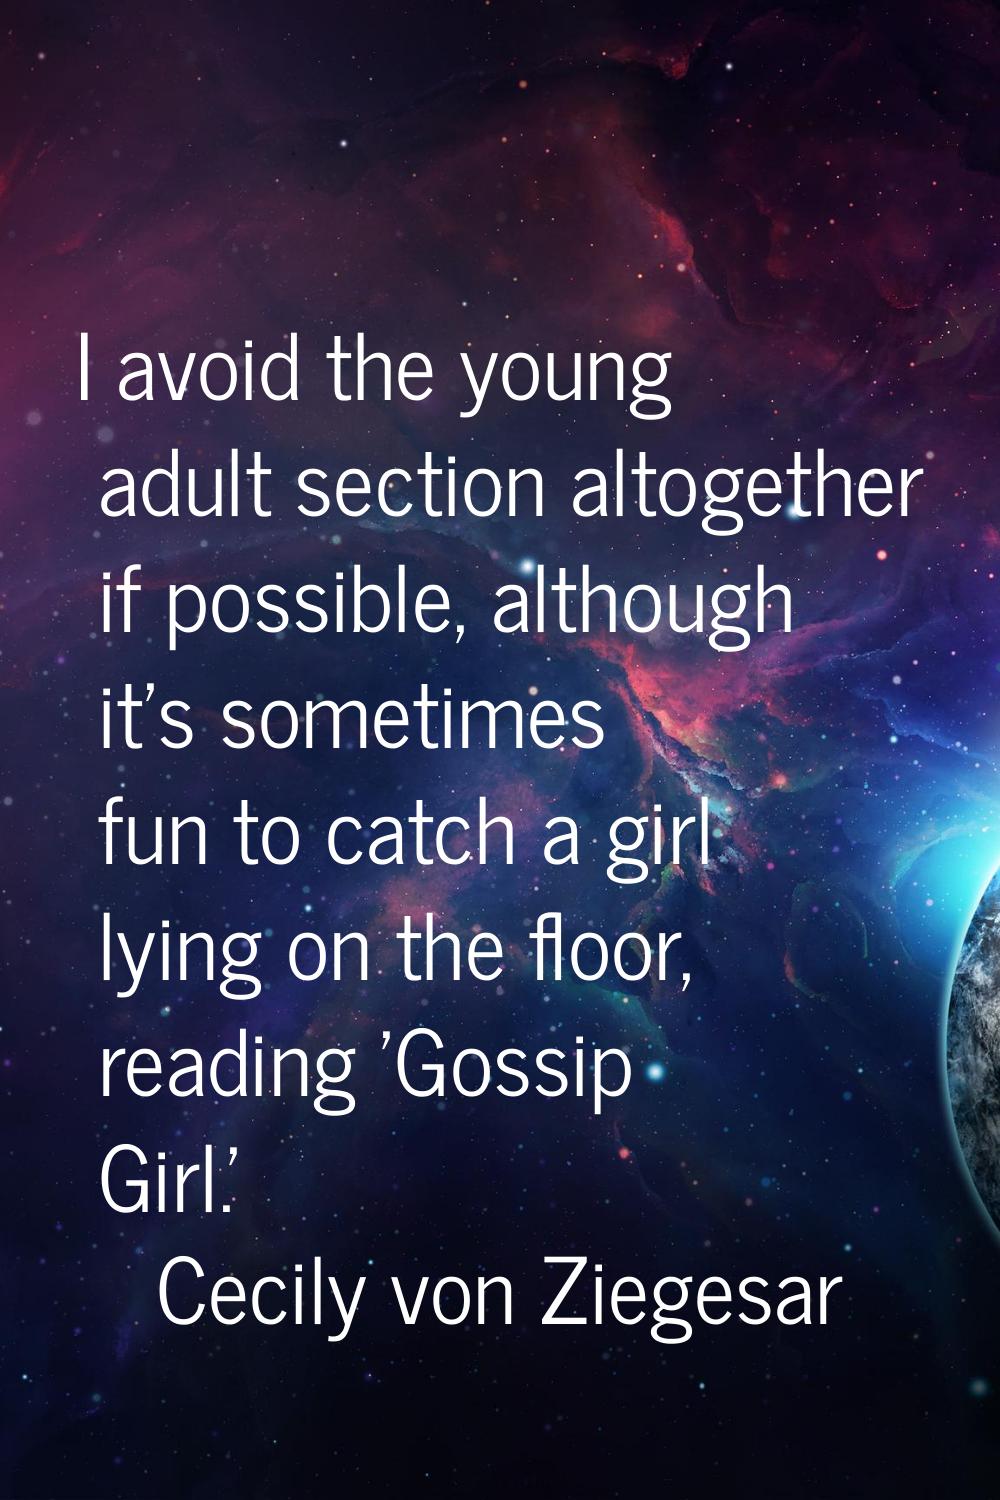 I avoid the young adult section altogether if possible, although it's sometimes fun to catch a girl